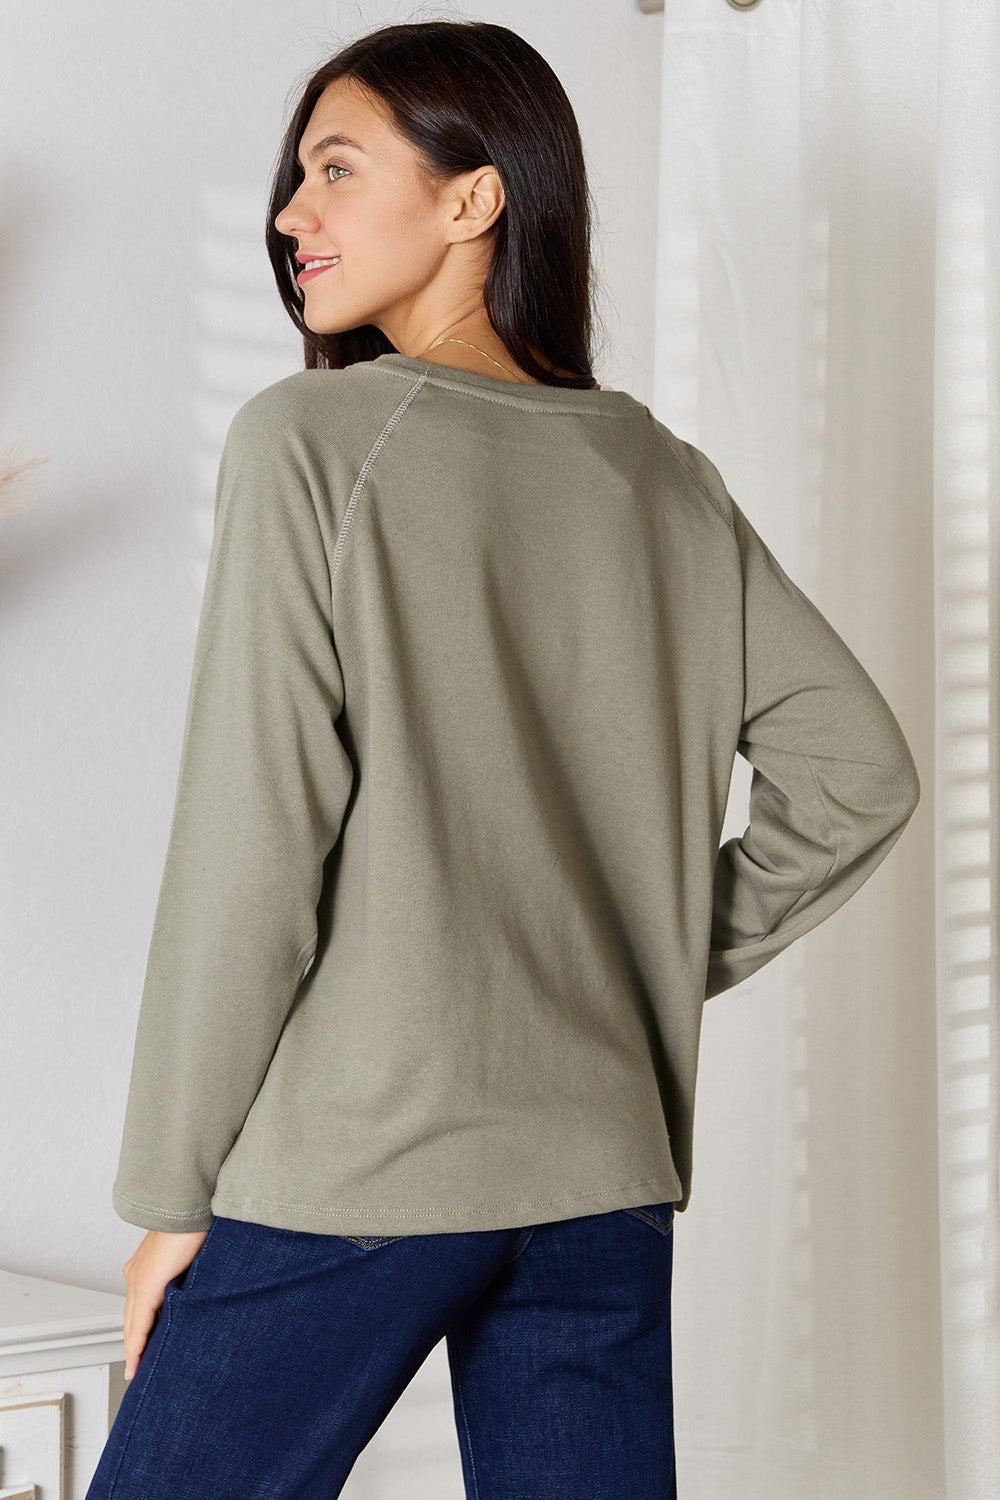 Sage Green Long Sleeve Tee - Inspired Eye Boutique